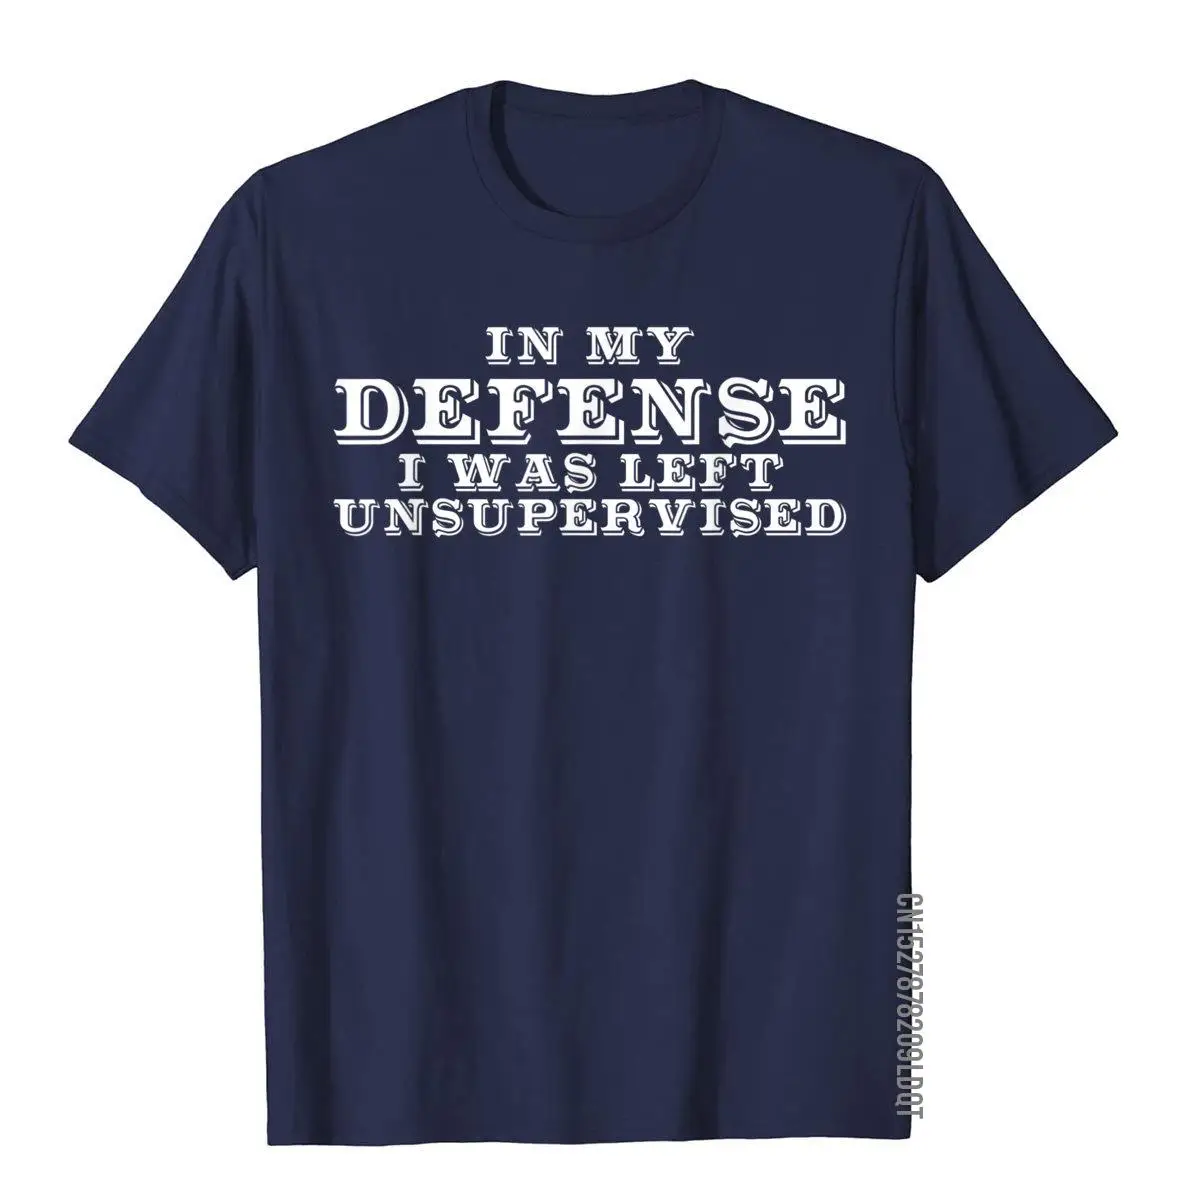 In my defense i was left unsupervised T-shirt__B5616navy